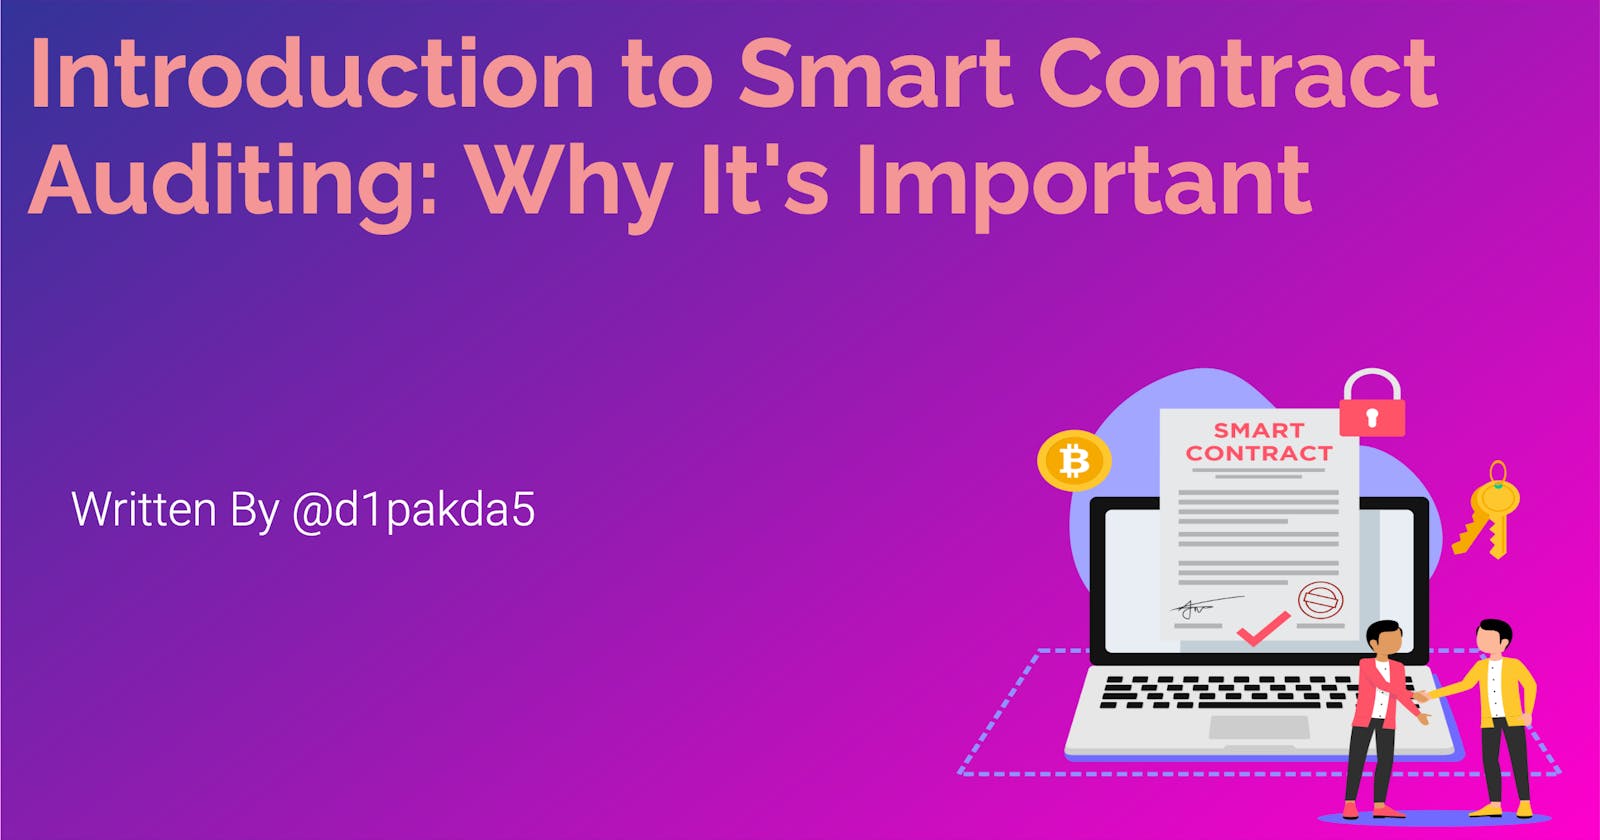 Introduction To Smart Contract Auditing: Why It's Important